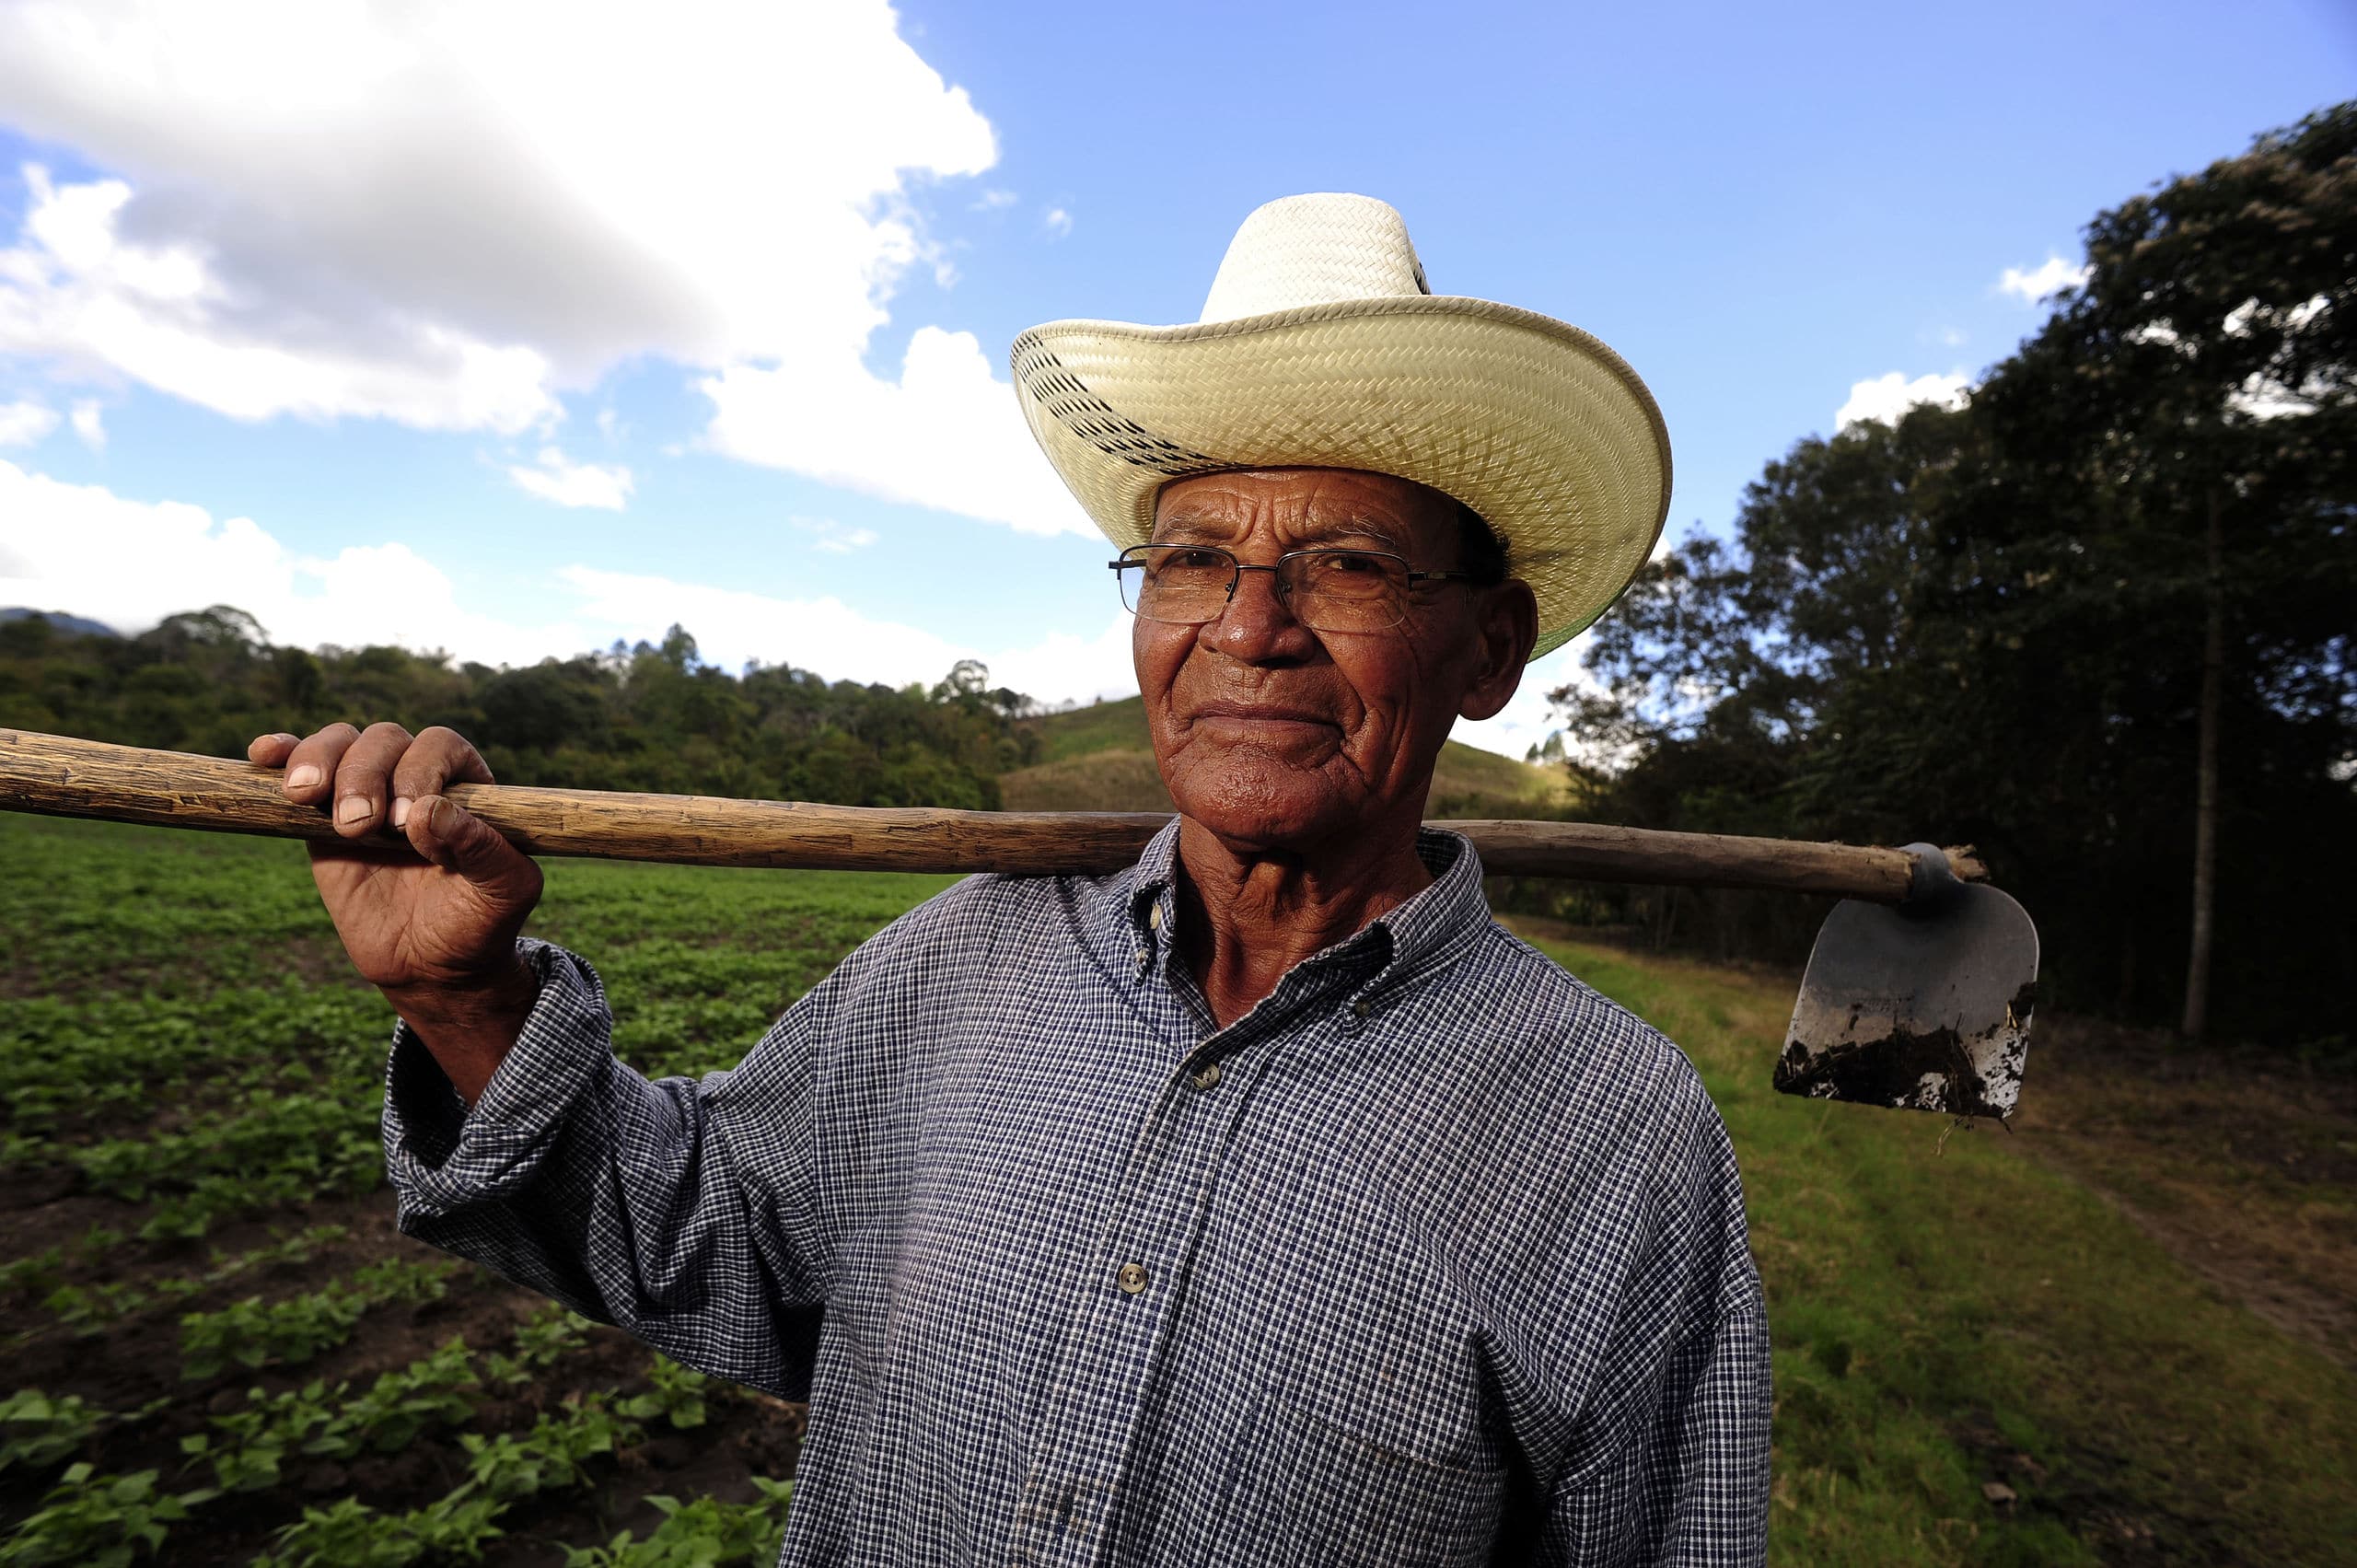 Farmworkers fearing toxic pesticide exposure fight for organic agriculture